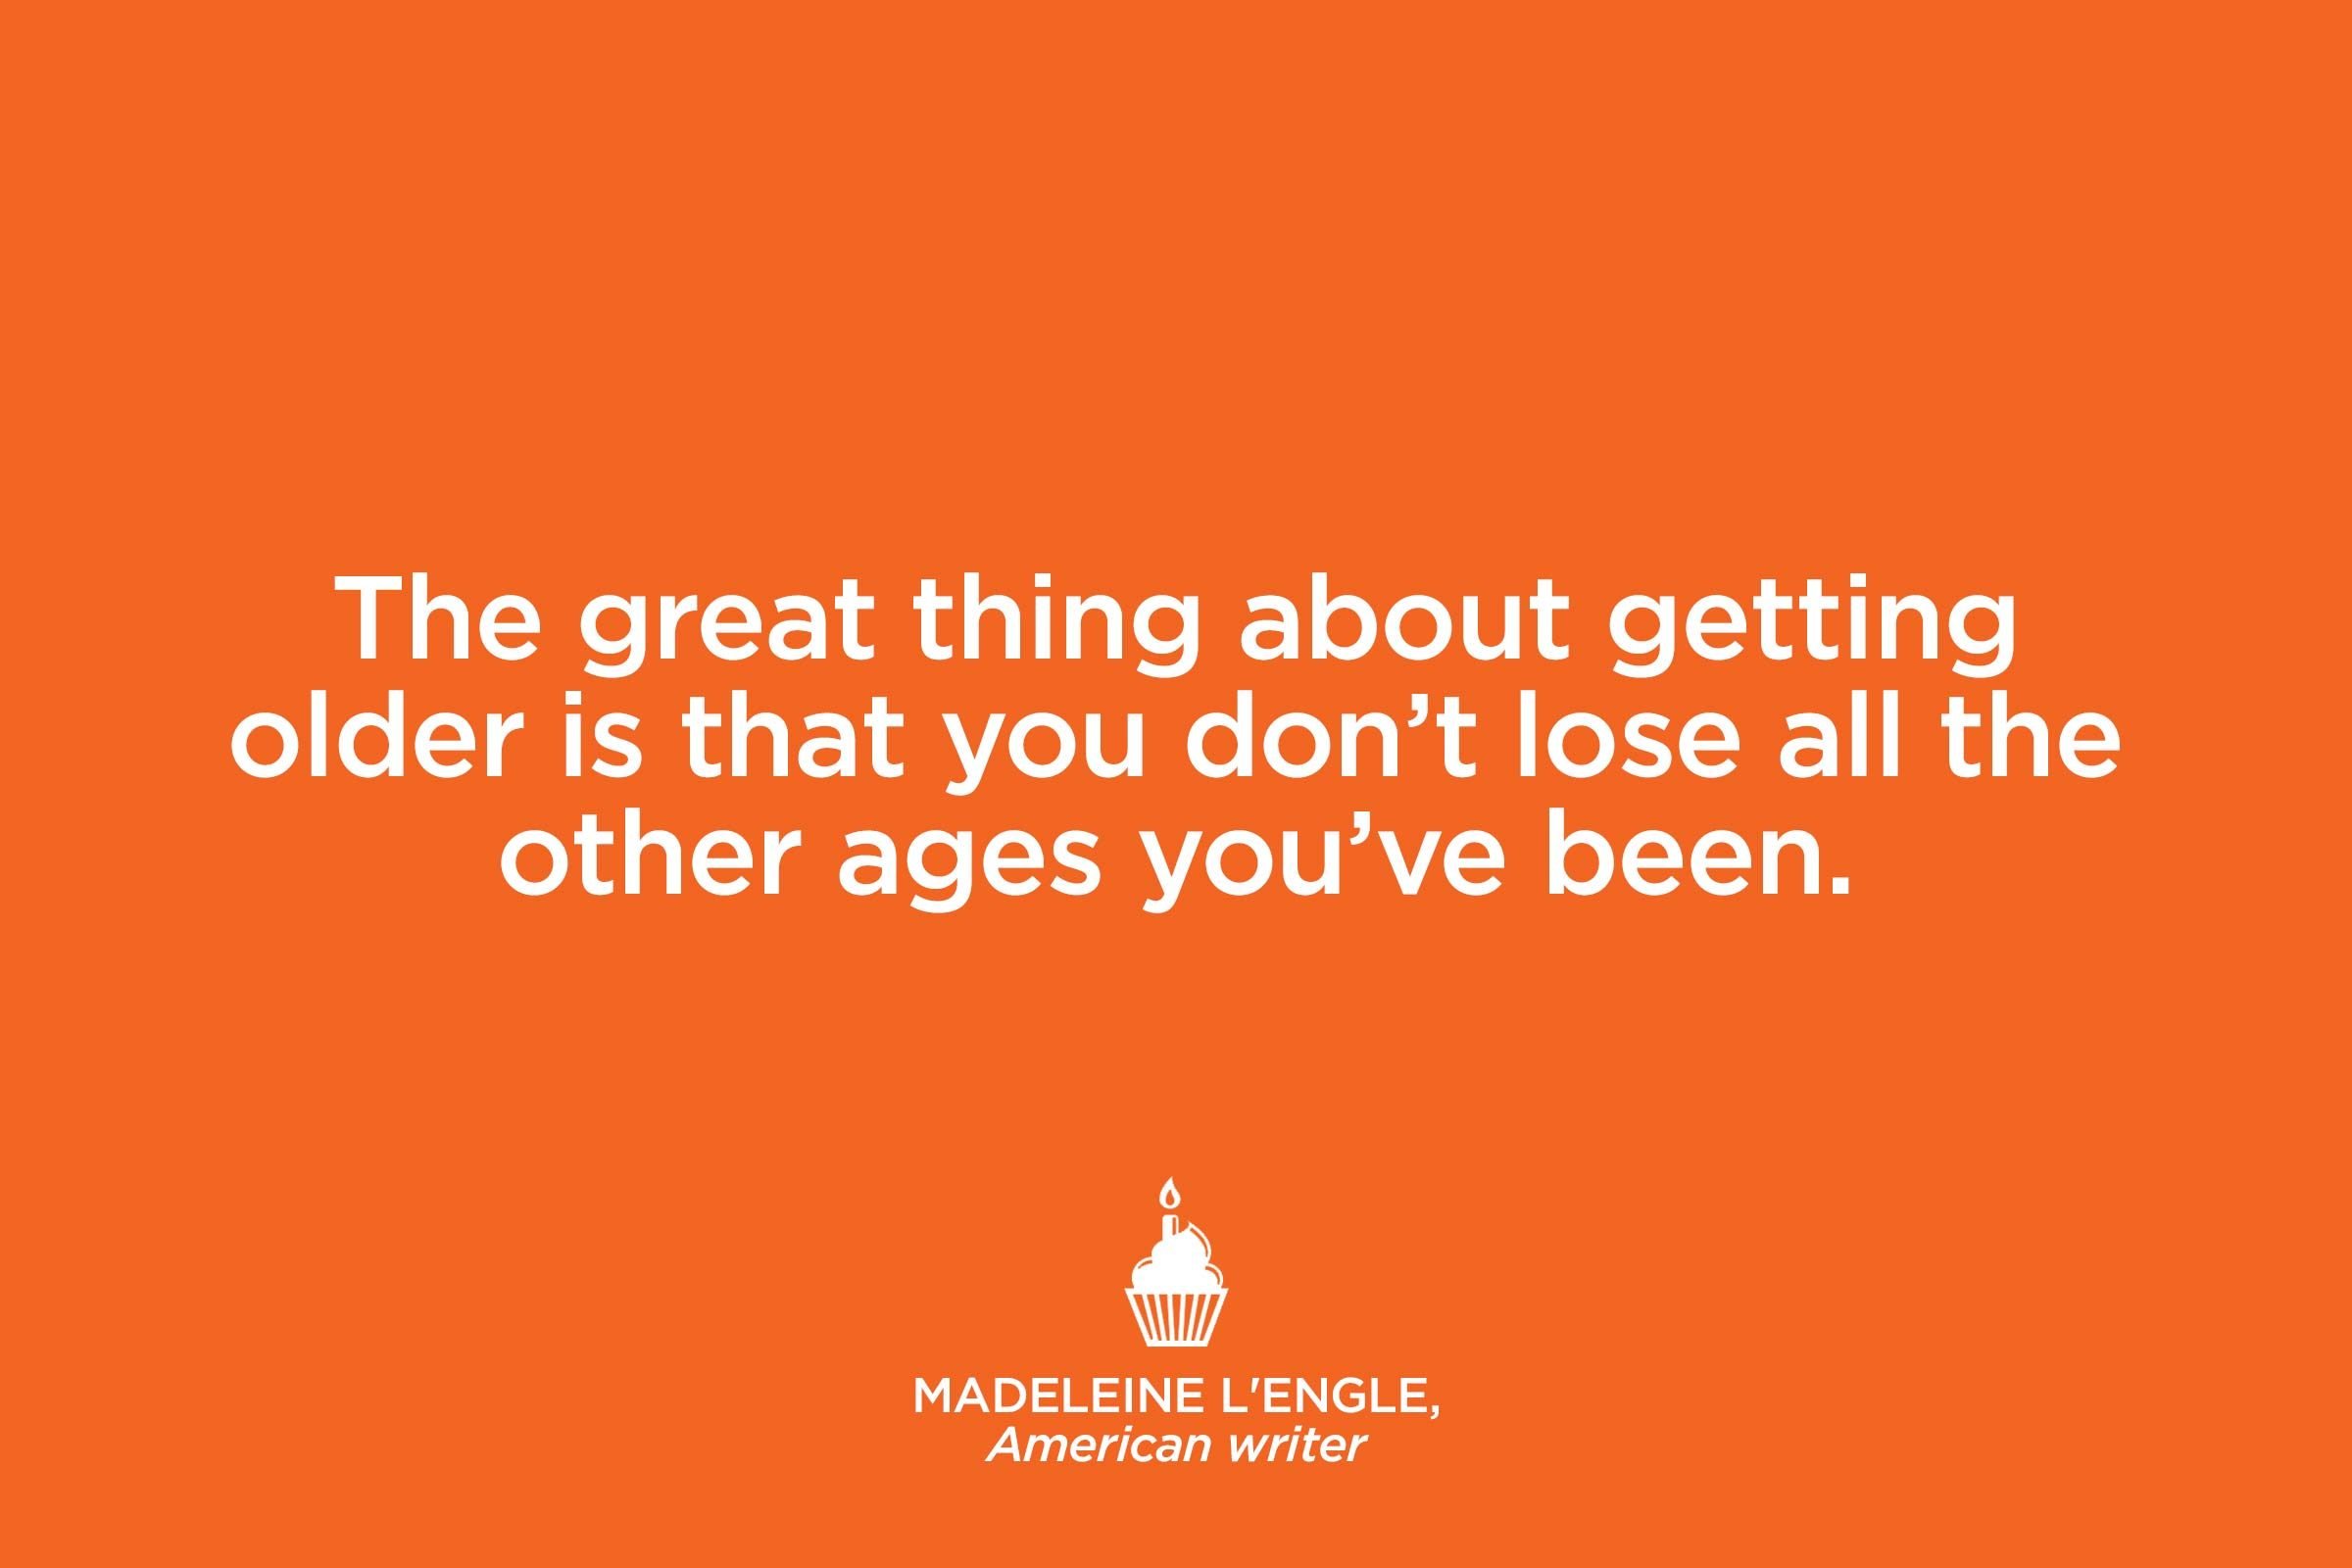 Quotes That Make You Feel Better About Getting Older | The Healthy